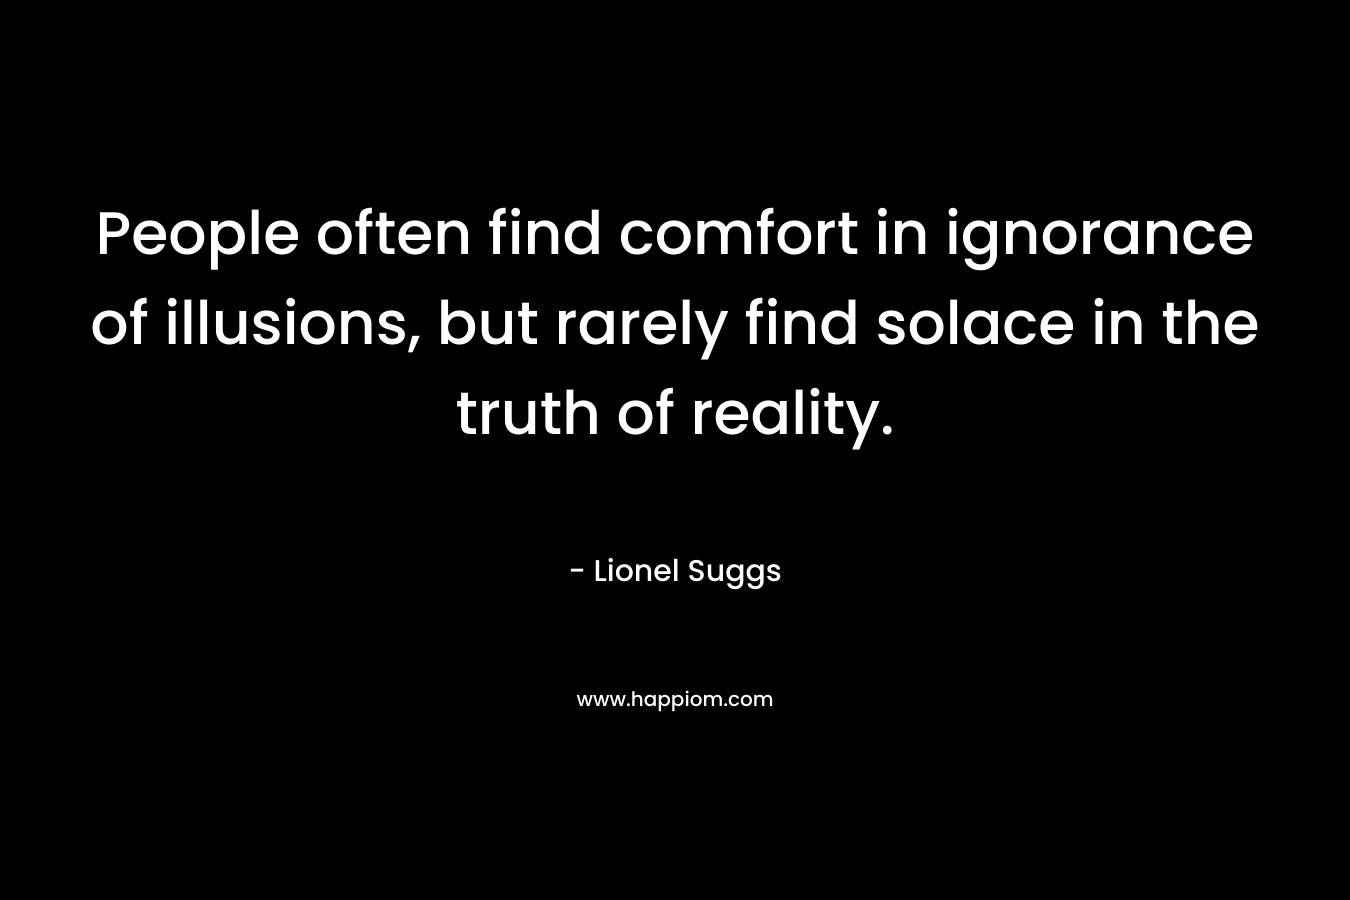 People often find comfort in ignorance of illusions, but rarely find solace in the truth of reality. – Lionel Suggs